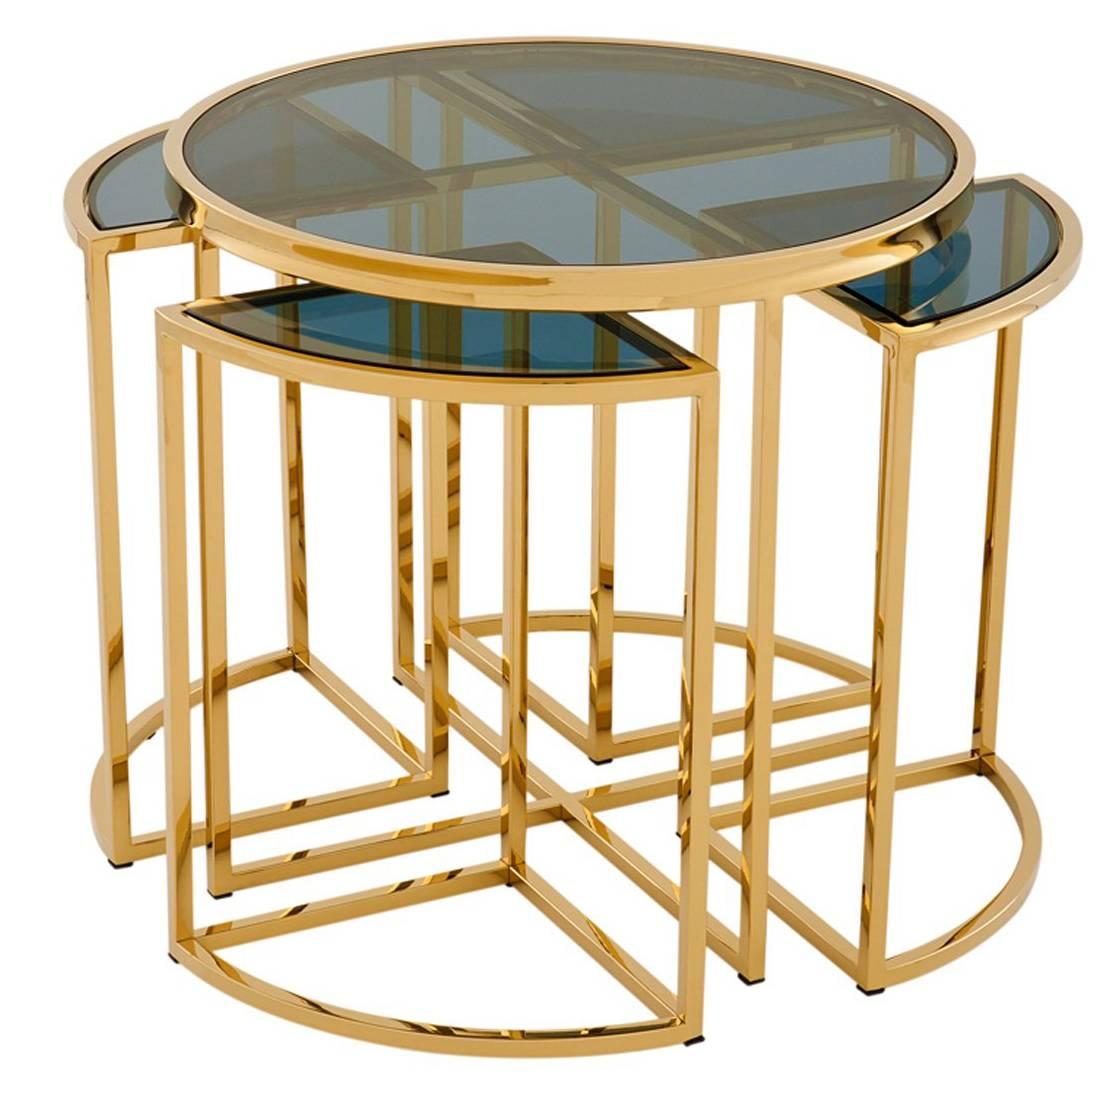 Four Pieces Side Table in Gold Finish or Polished Stainless Steel